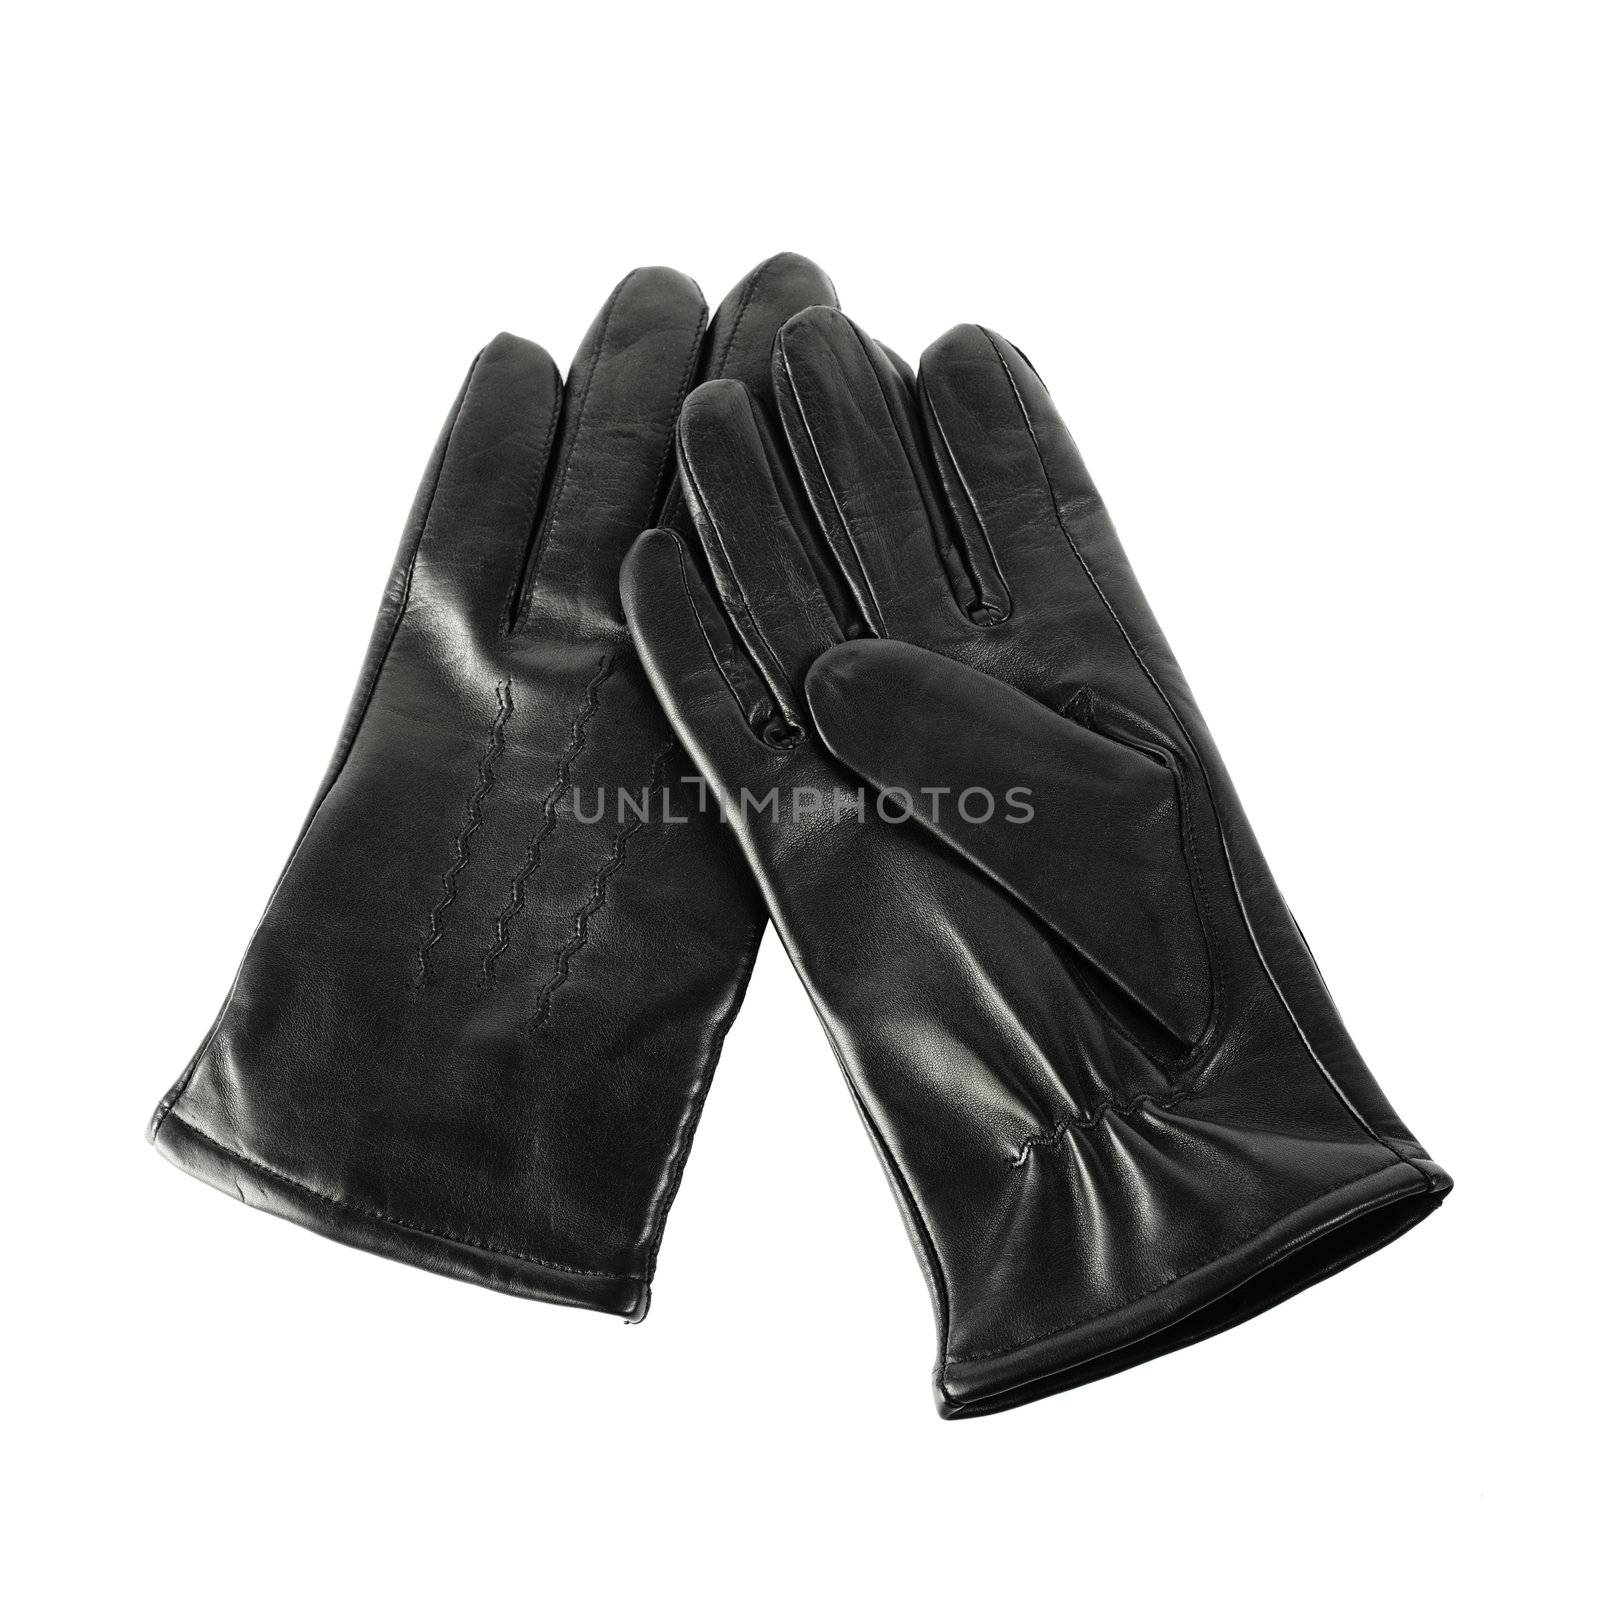 Pair of new black men's leather gloves isolated on white